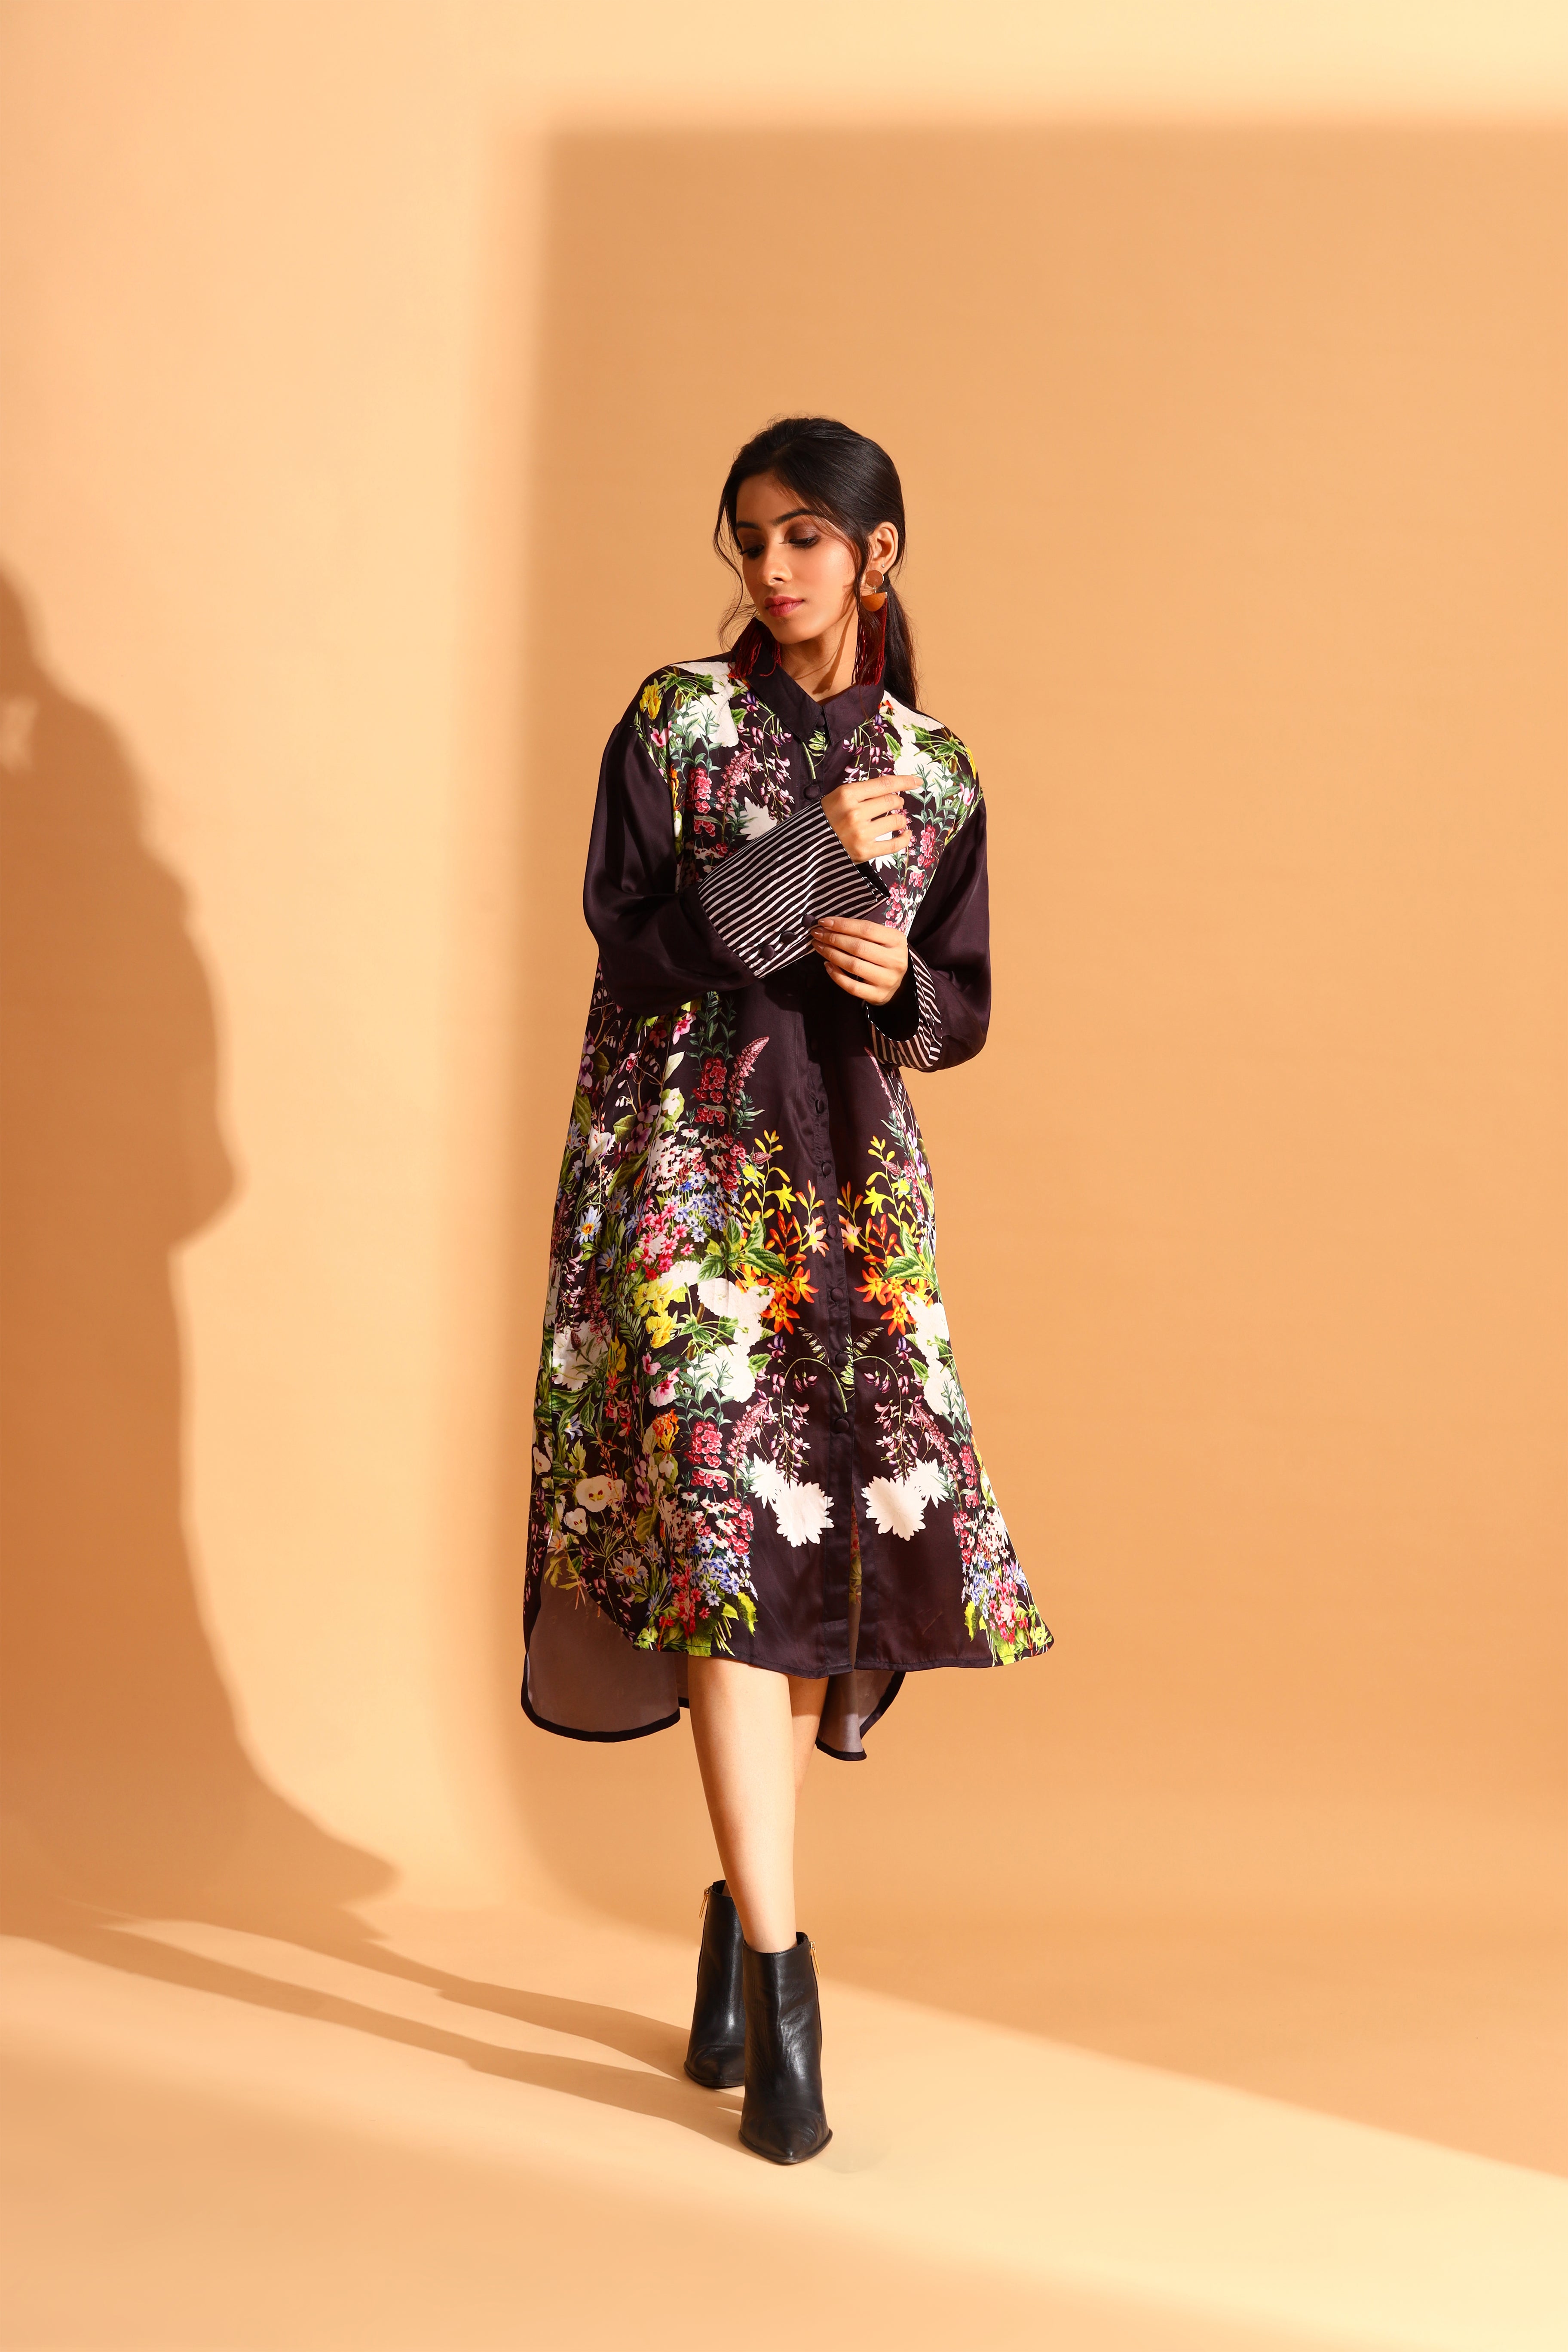 Moh India - Buds & Blooms Dress